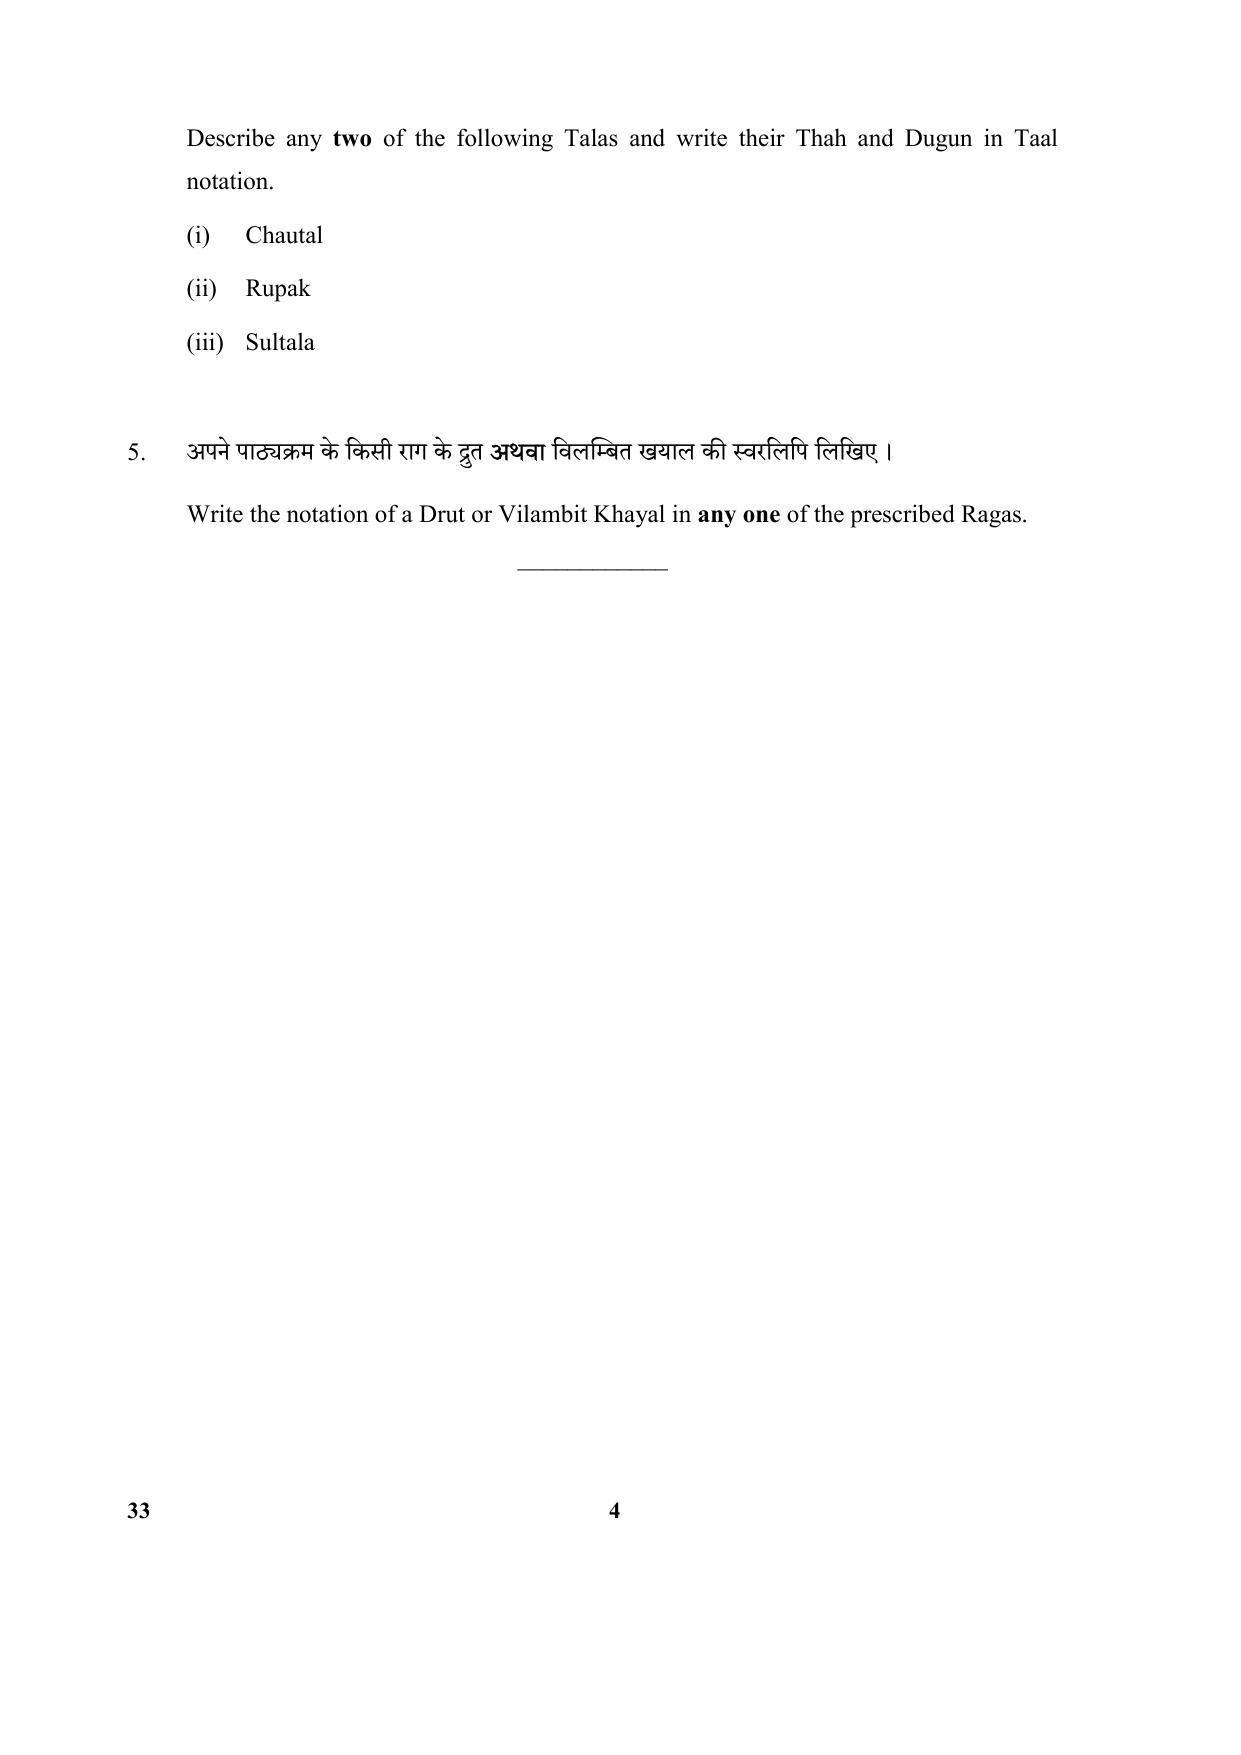 CBSE Class 10 33 (Hindustani Music Vocal) 2018 Question Paper - Page 4